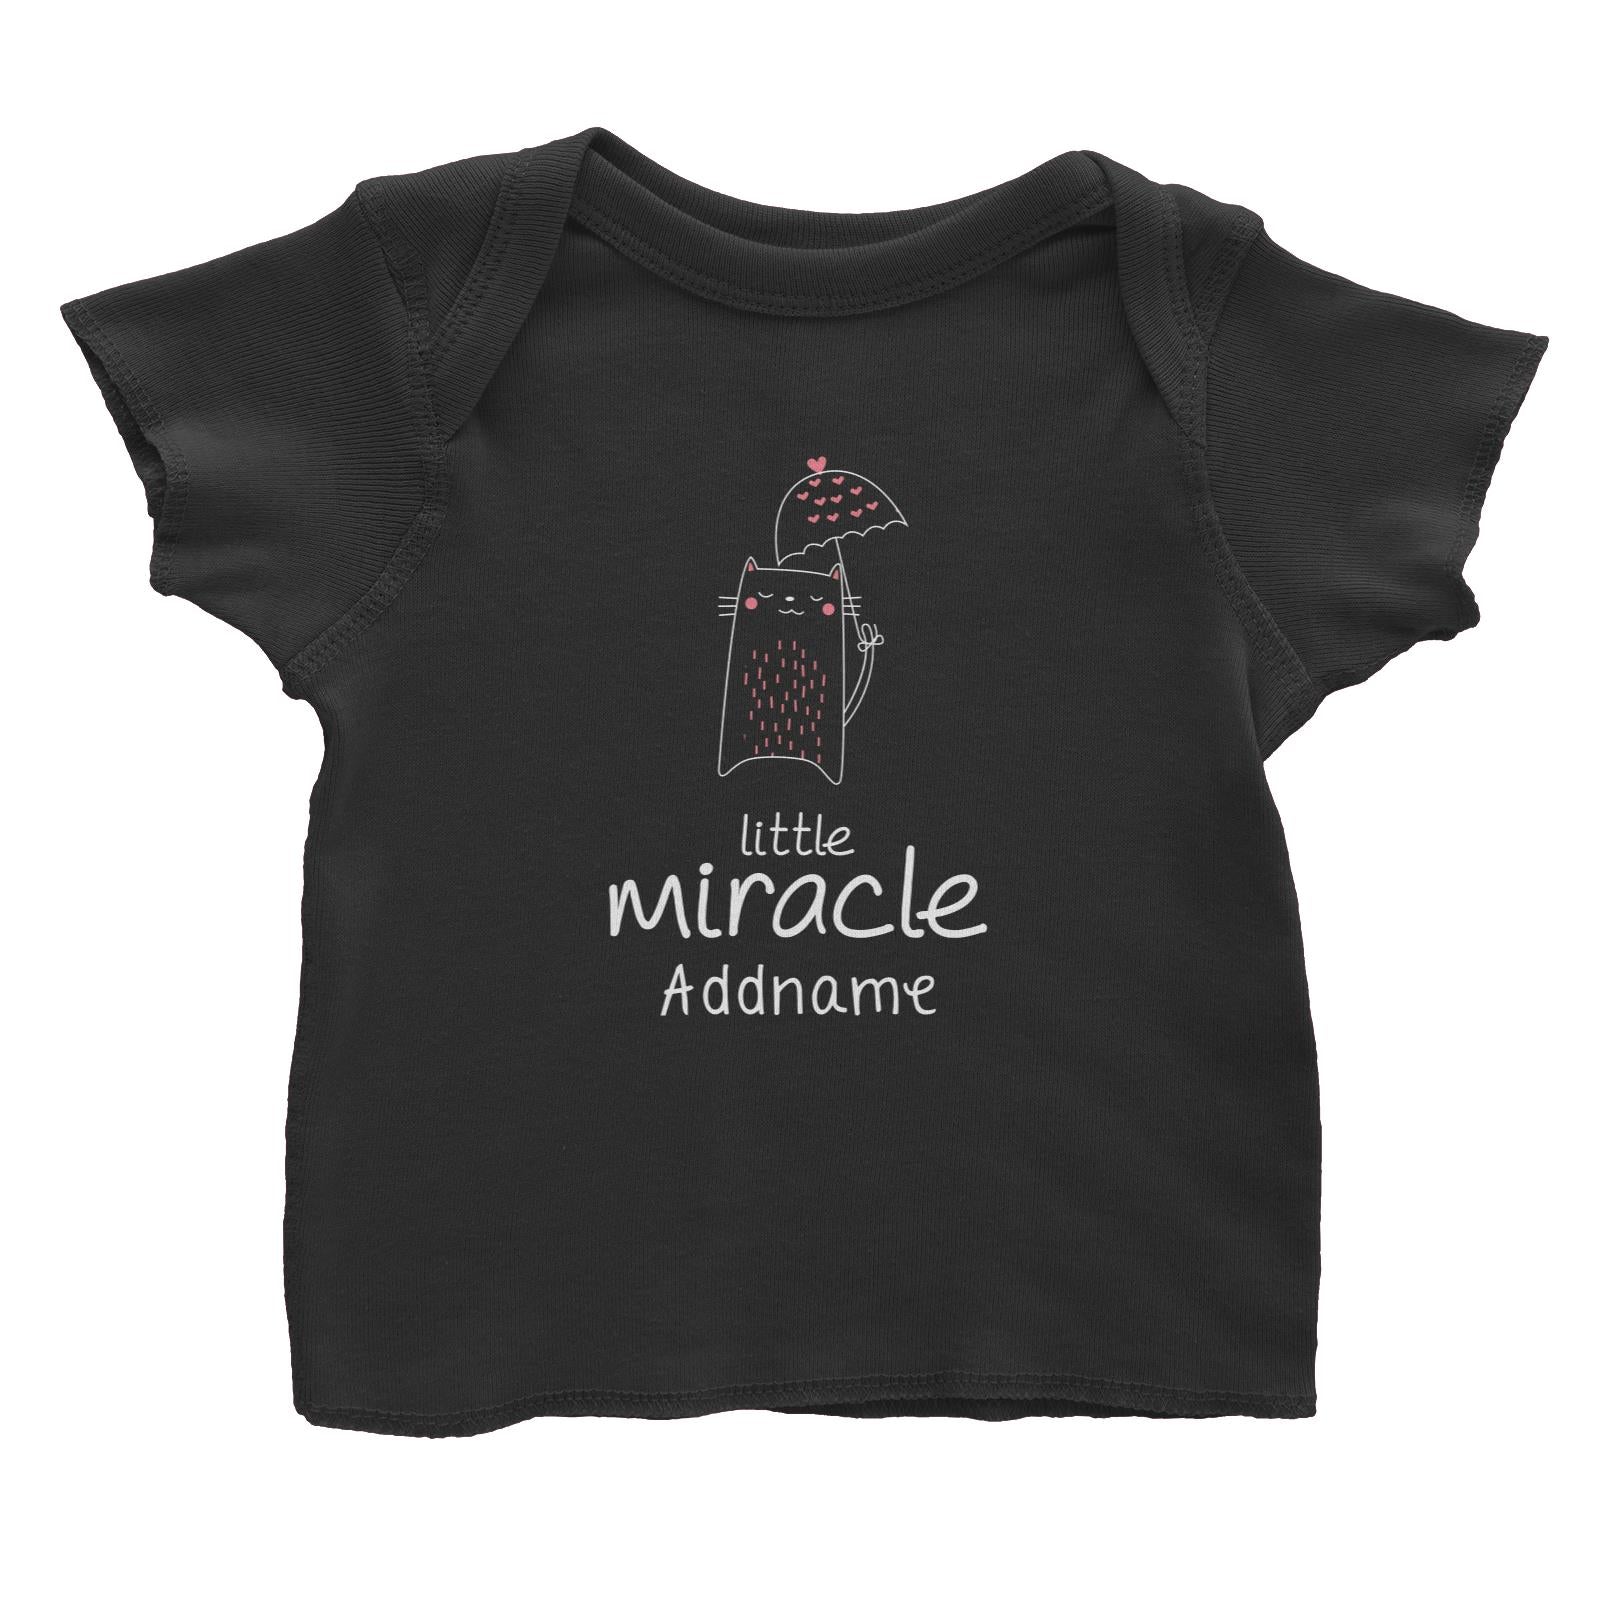 Cute Animals and Friends Series 2 Cat Little Miracle Addname Baby T-Shirt